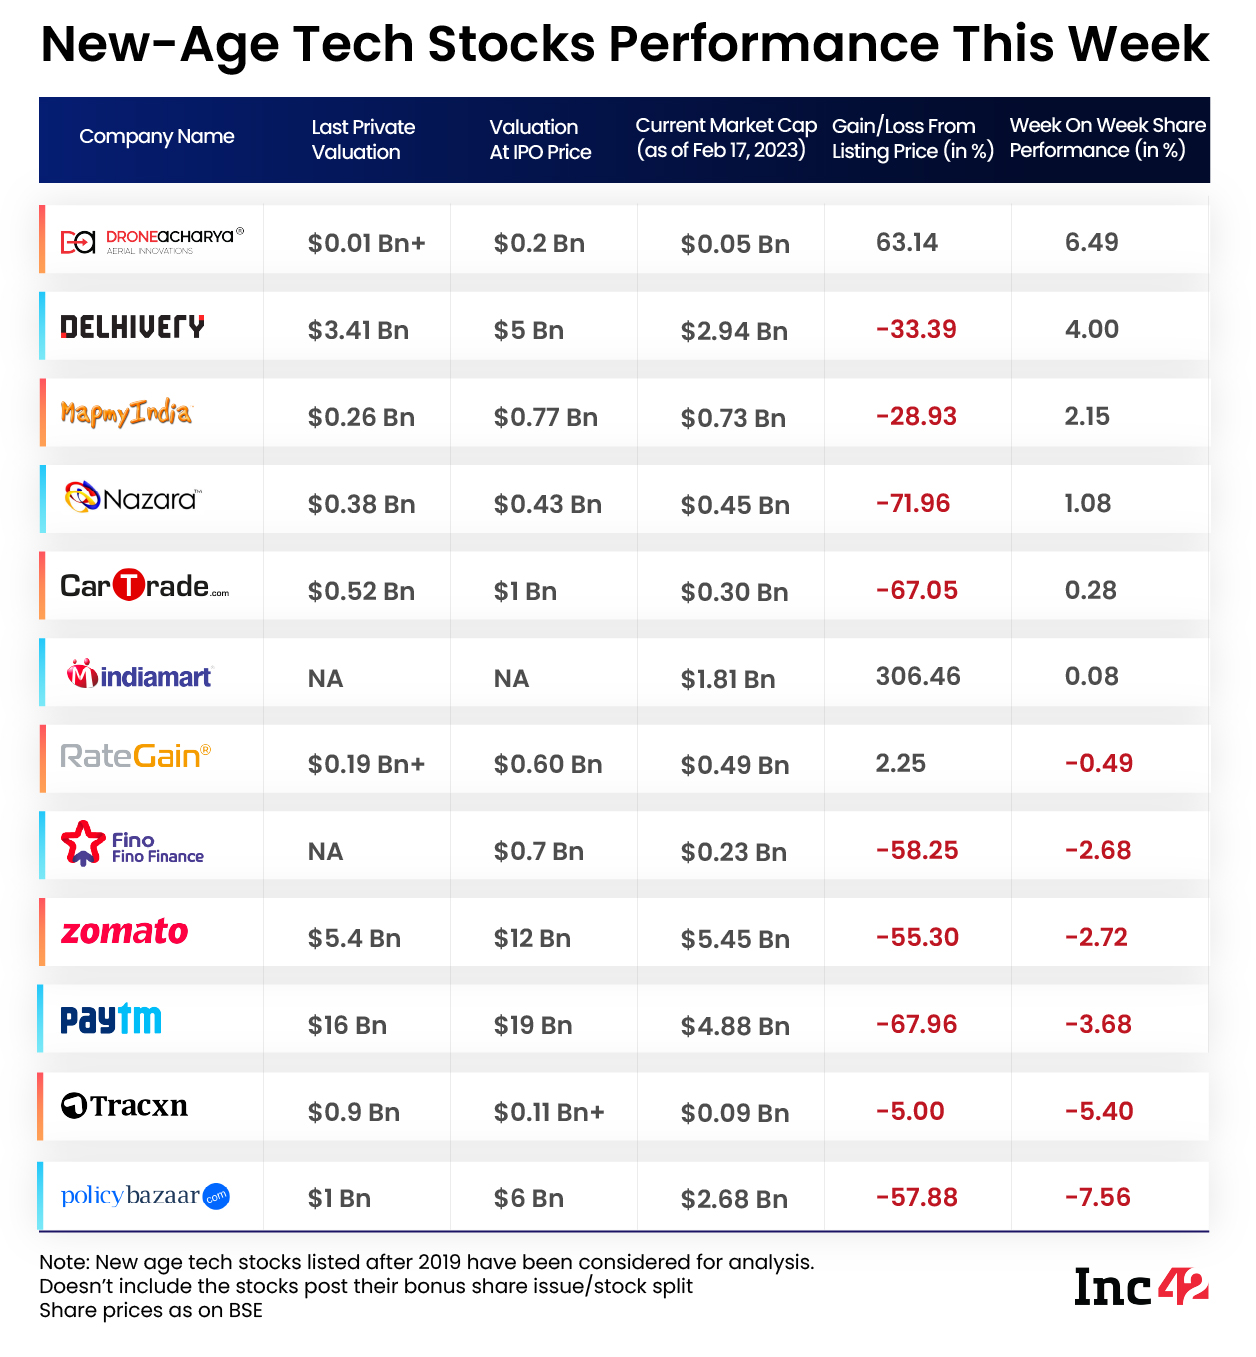 new-age tech stock performance